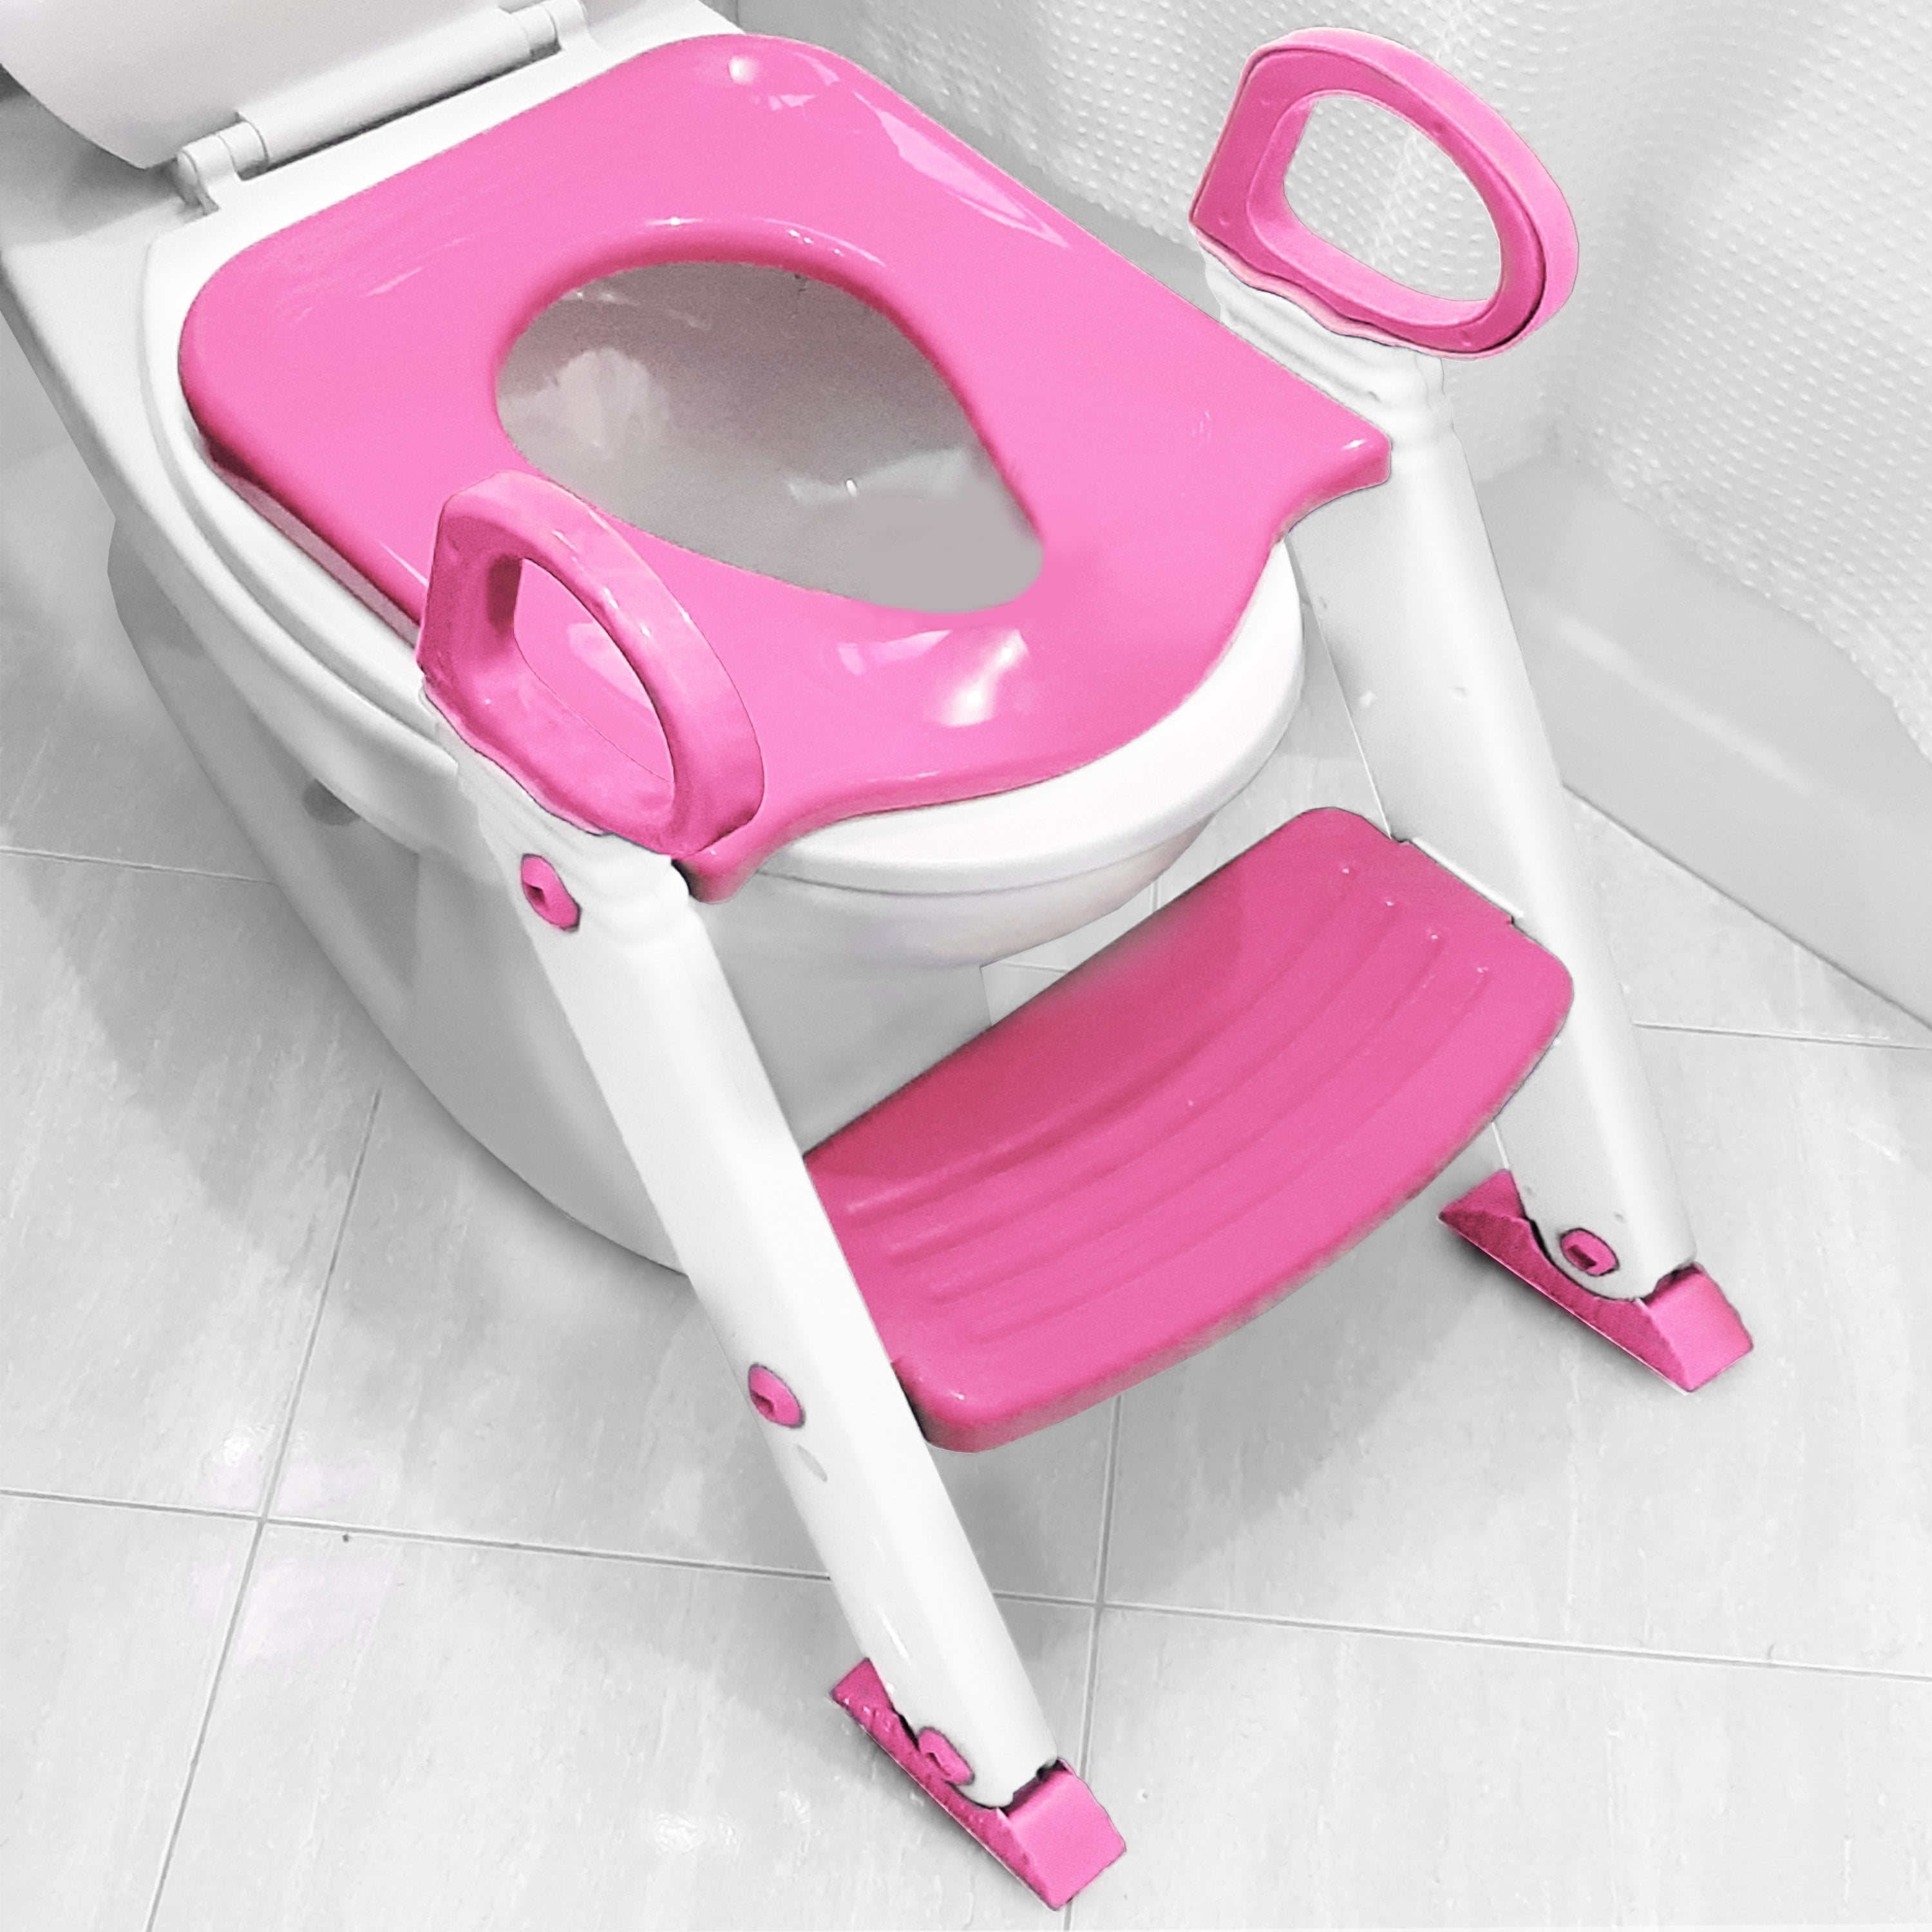 2 step Ladder Toilet trainer for Child Baby Toddler Toilet Training potty Seat 